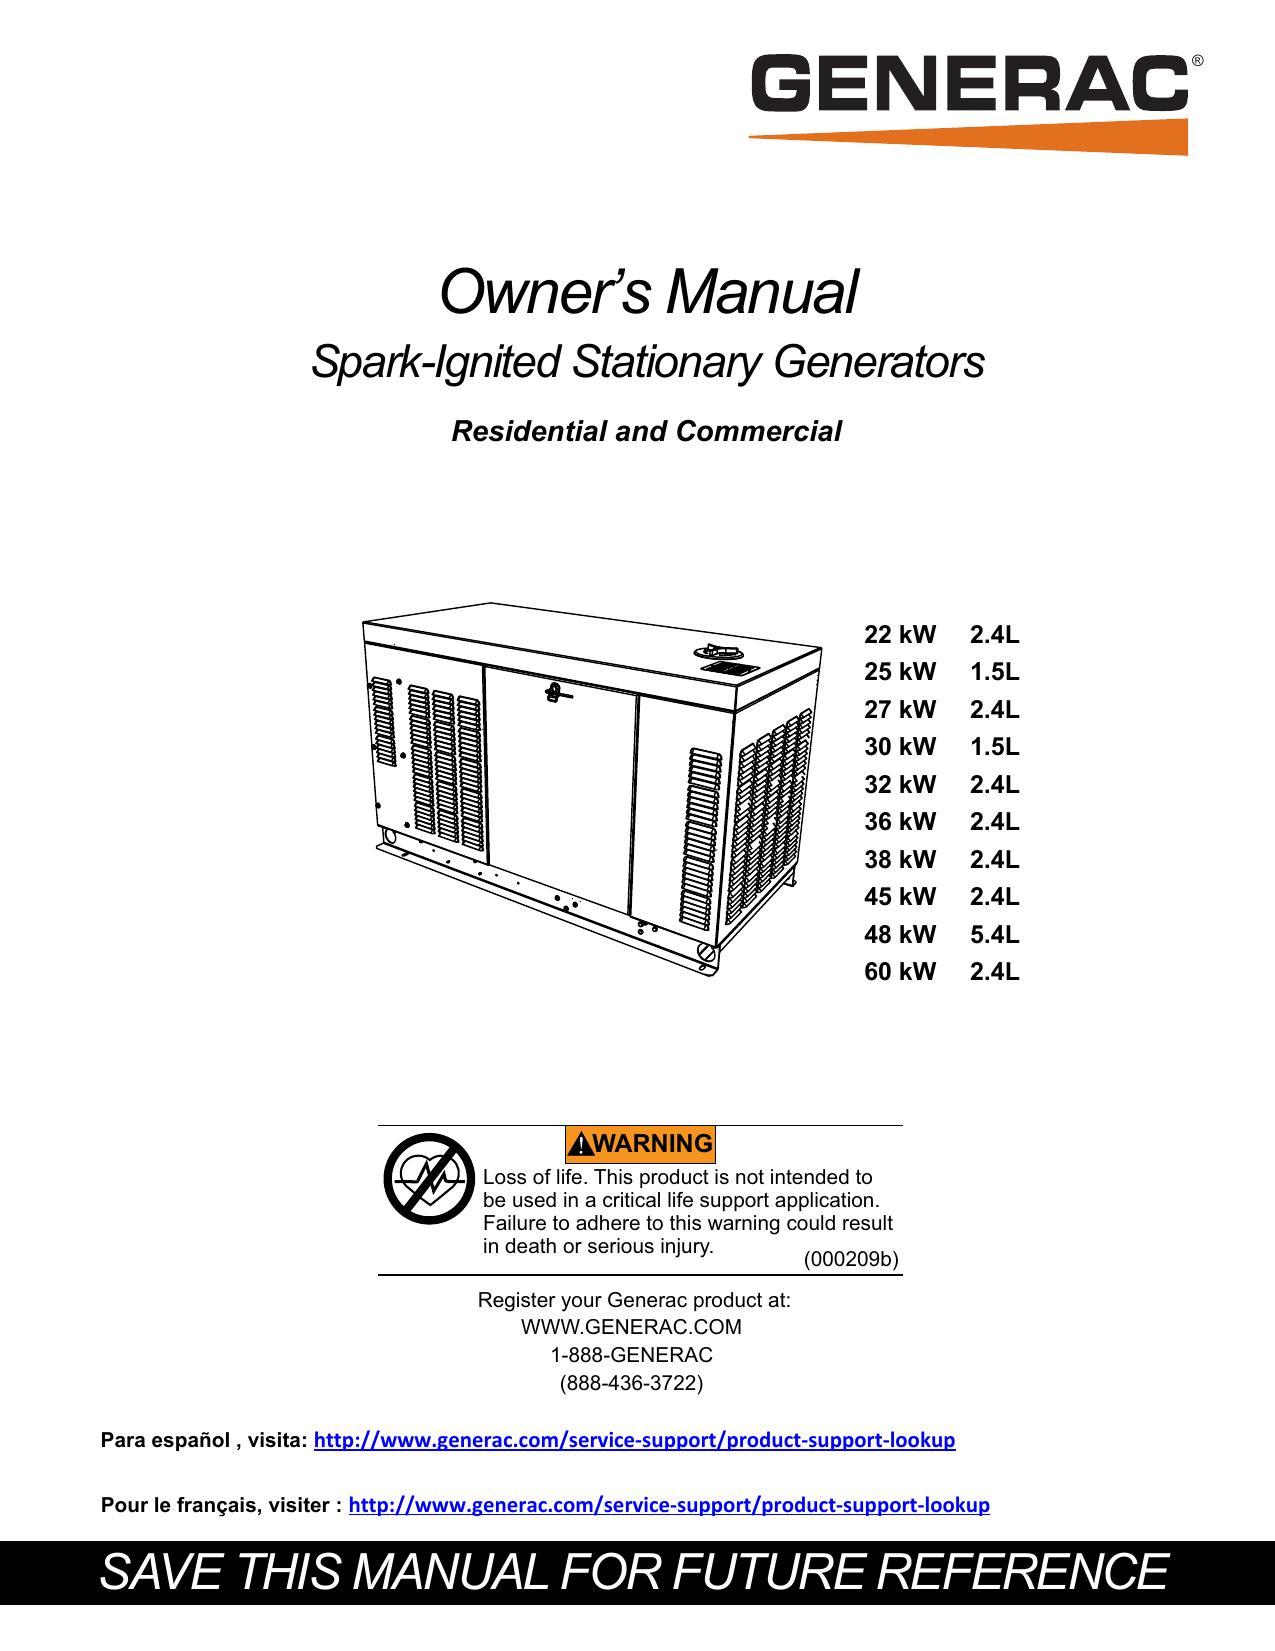 owners-manual-for-stationary-generators.pdf